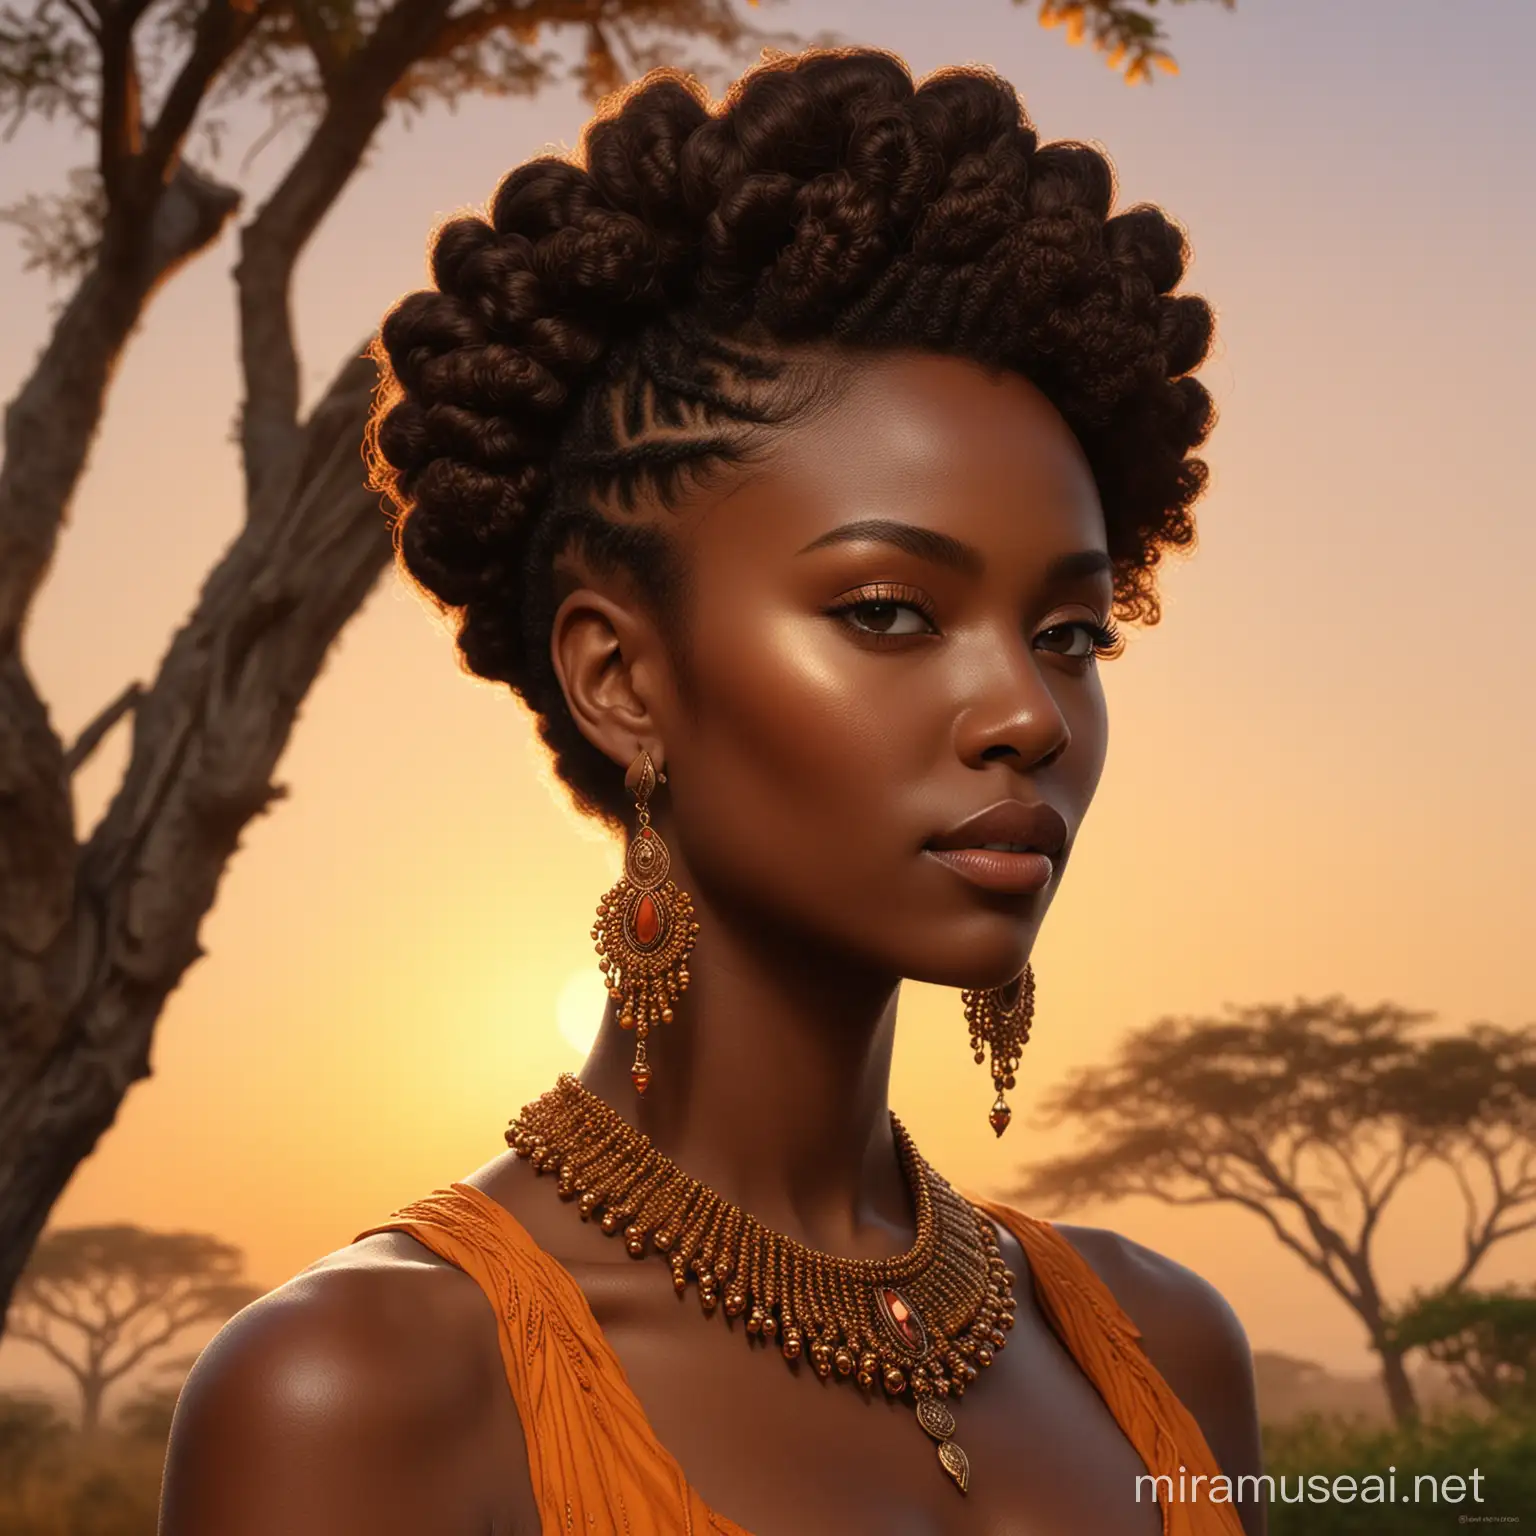 Generate an illustrated portrait of a regal African woman in profile. The woman has a strong, elegant silhouette, and her skin is richly dark with a subtle, natural sheen. Her facial features are finely detailed, exhibiting a high cheekbone, a straight nose, and full lips. She has a piercing, thoughtful gaze. Her hair is styled in an updo with a mix of intricate braids and curls, adorned with decorative beads and a feather. Silhouetted against a sunset, her hair seamlessly transitions into the shape of an Acacia tree with a lush canopy. The sky behind her is a gradient of warm oranges and yellows, evoking the feeling of an African savannah at dusk. Three birds are flying in the distance, adding to the scene's tranquility. She is wearing elaborate jewelry, including a beaded necklace and dangling earrings, rich in oranges, reds, and golds, which complement the tones of the background. The artwork should be stylized and vibrant, with a focus on the fusion of the woman's form with the elements of nature, 32k render, hyperrealistic, detailed.